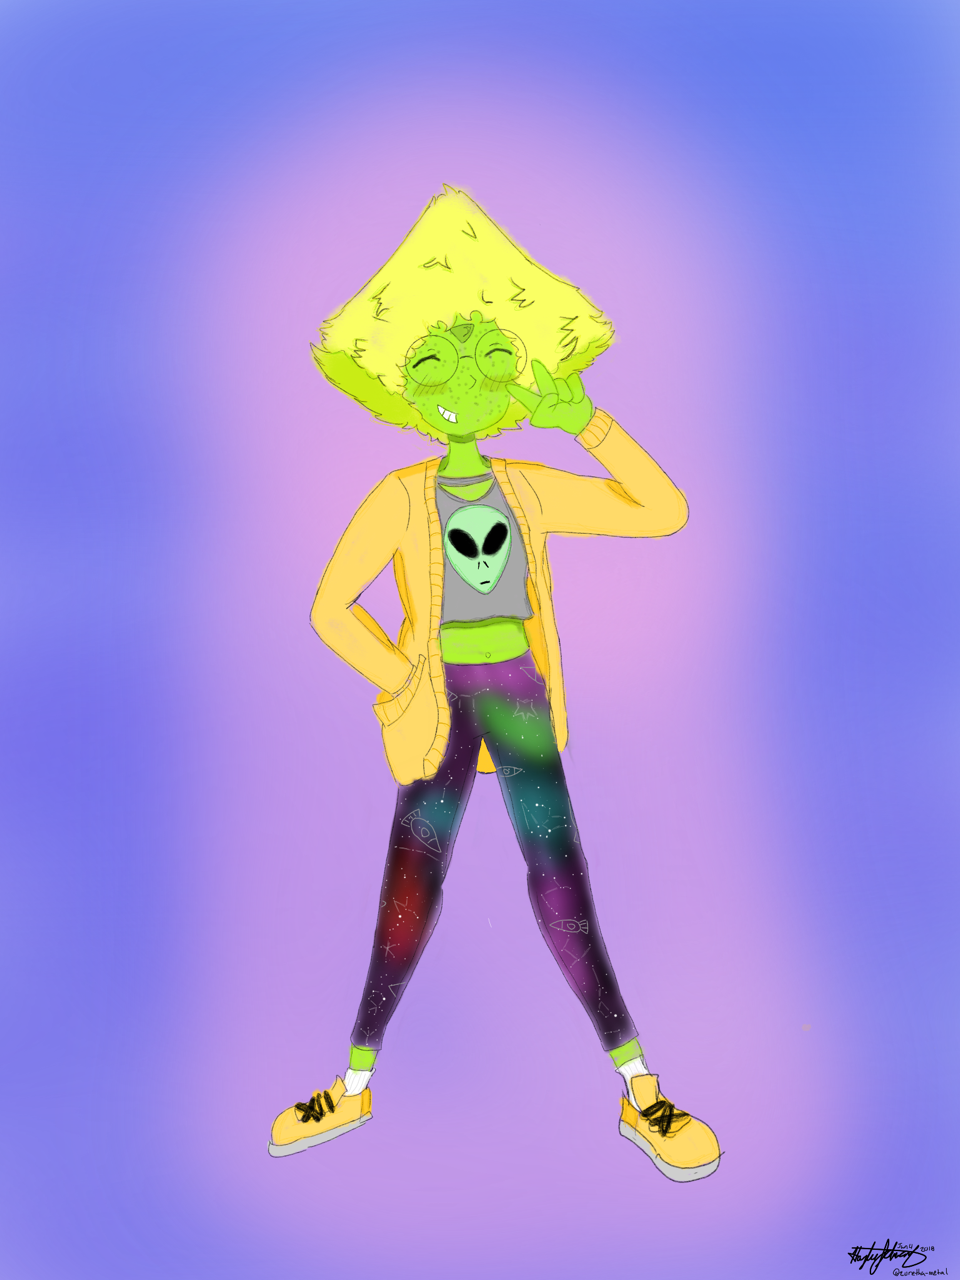 Had the urge to draw my favorite bean today. Here’s the in class and digi doodle of Peridot.